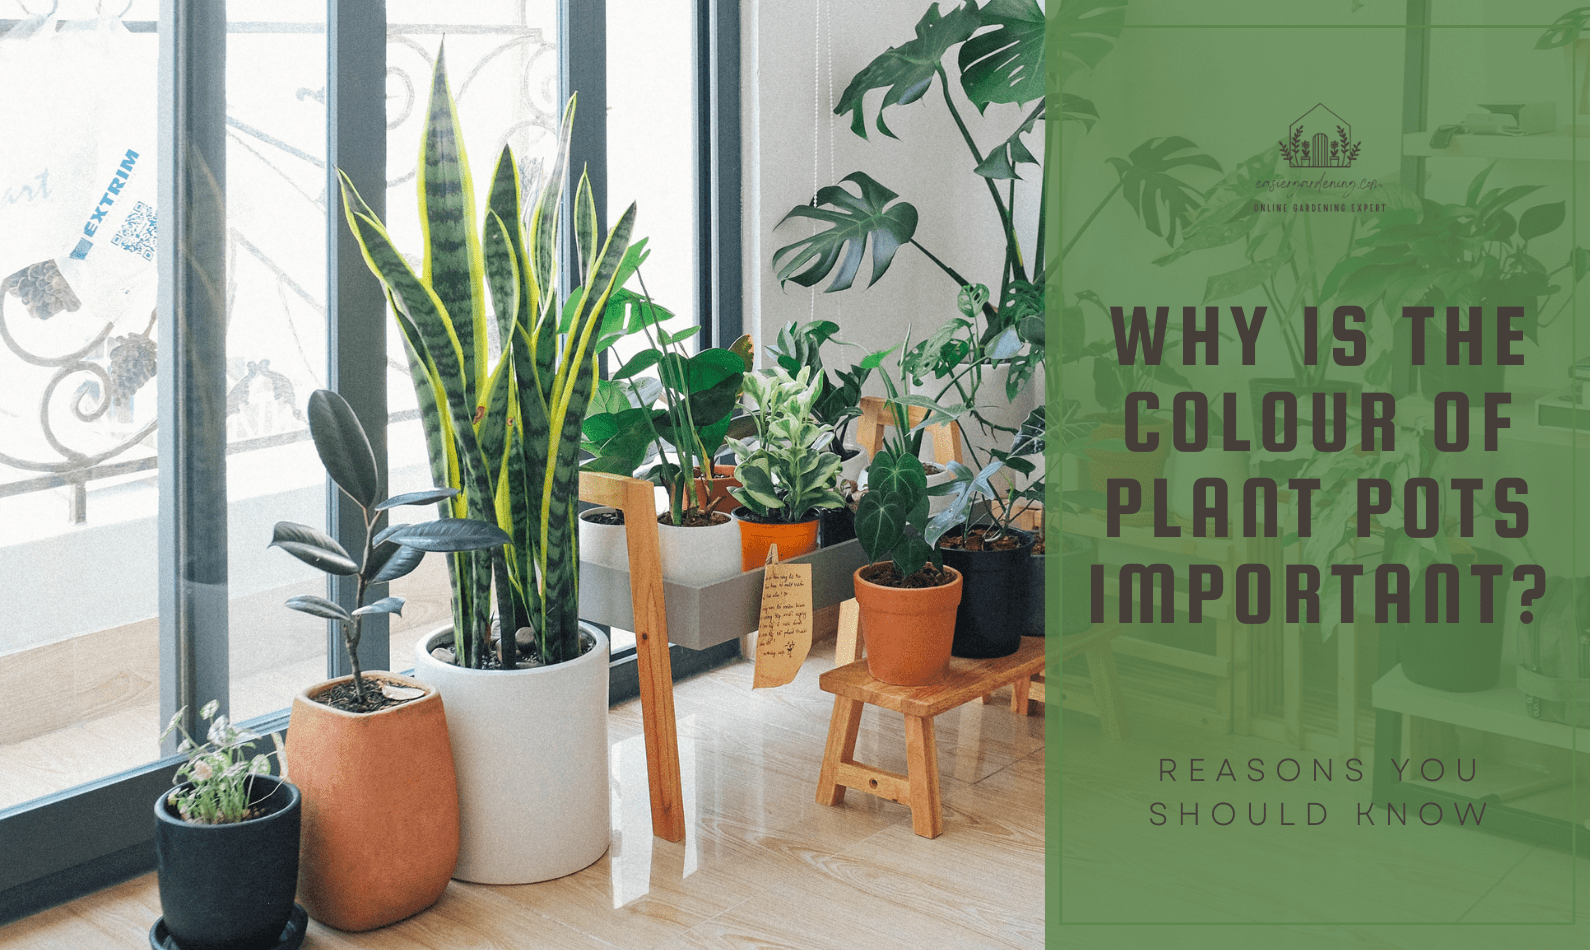 Why Is the Colour of Plant Pots Important?